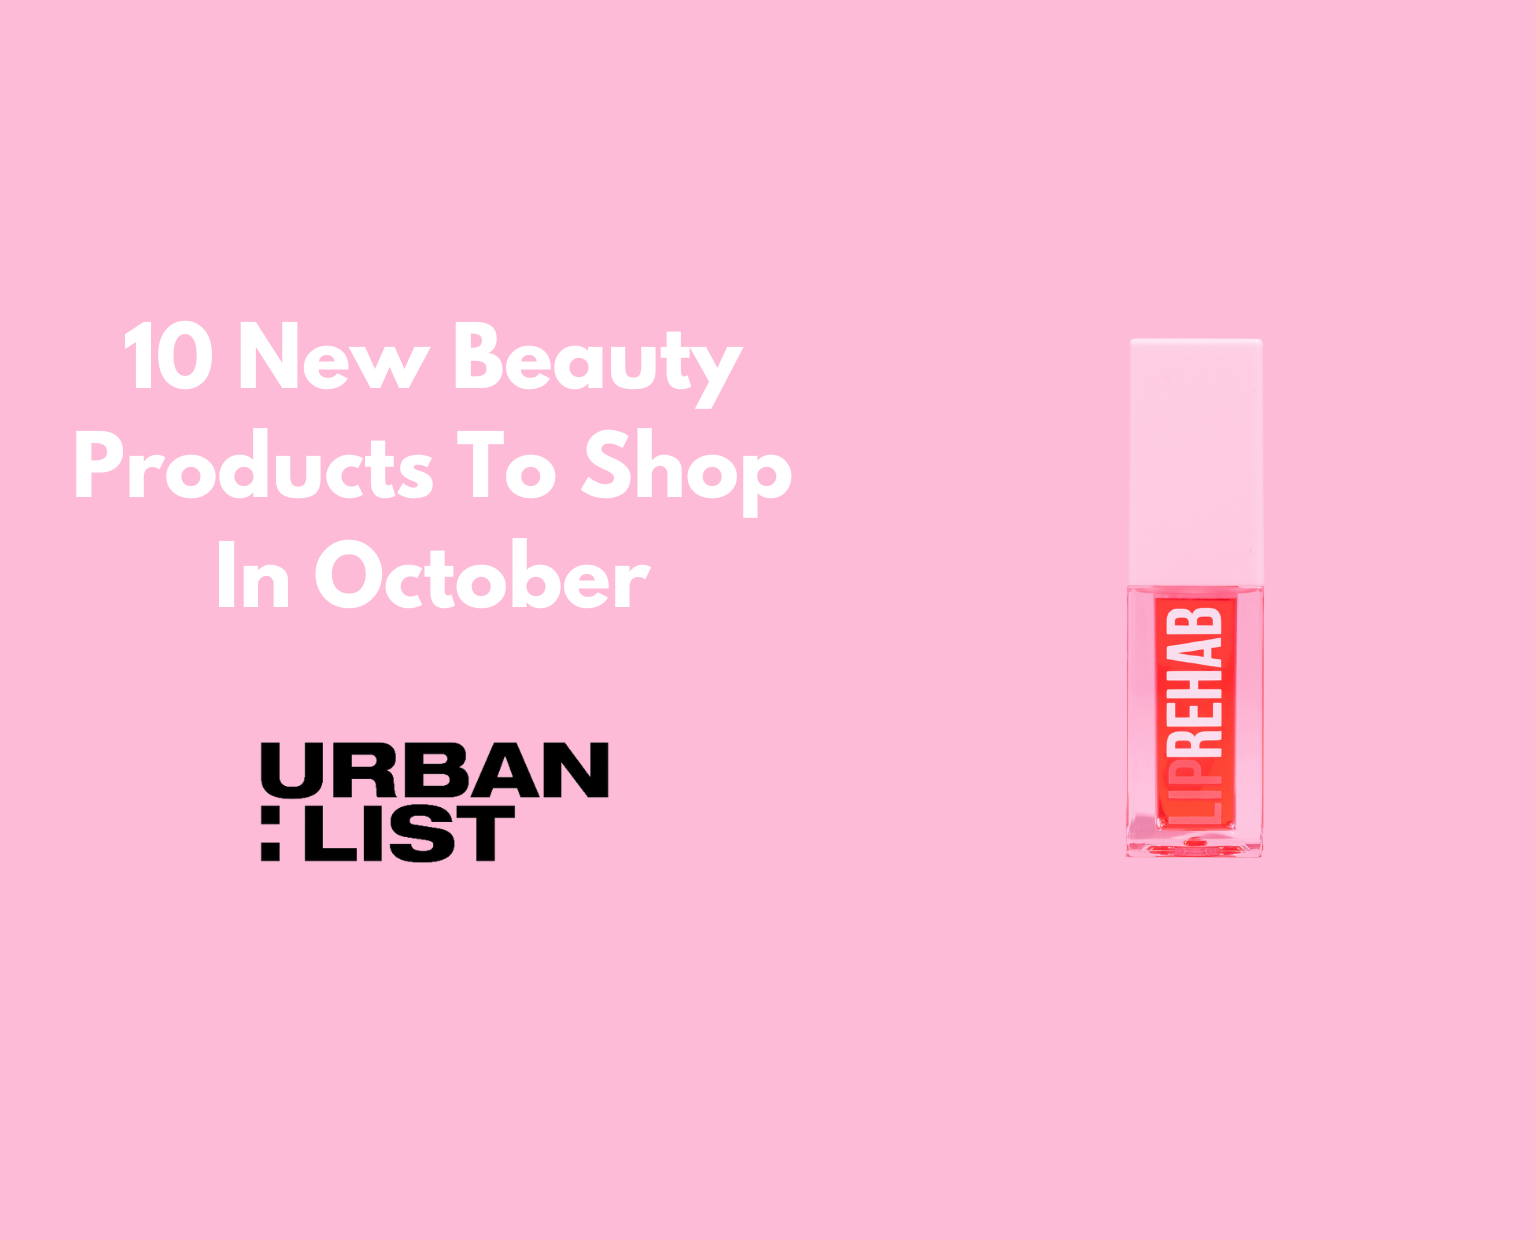 10 New Beauty Products To Shop In October